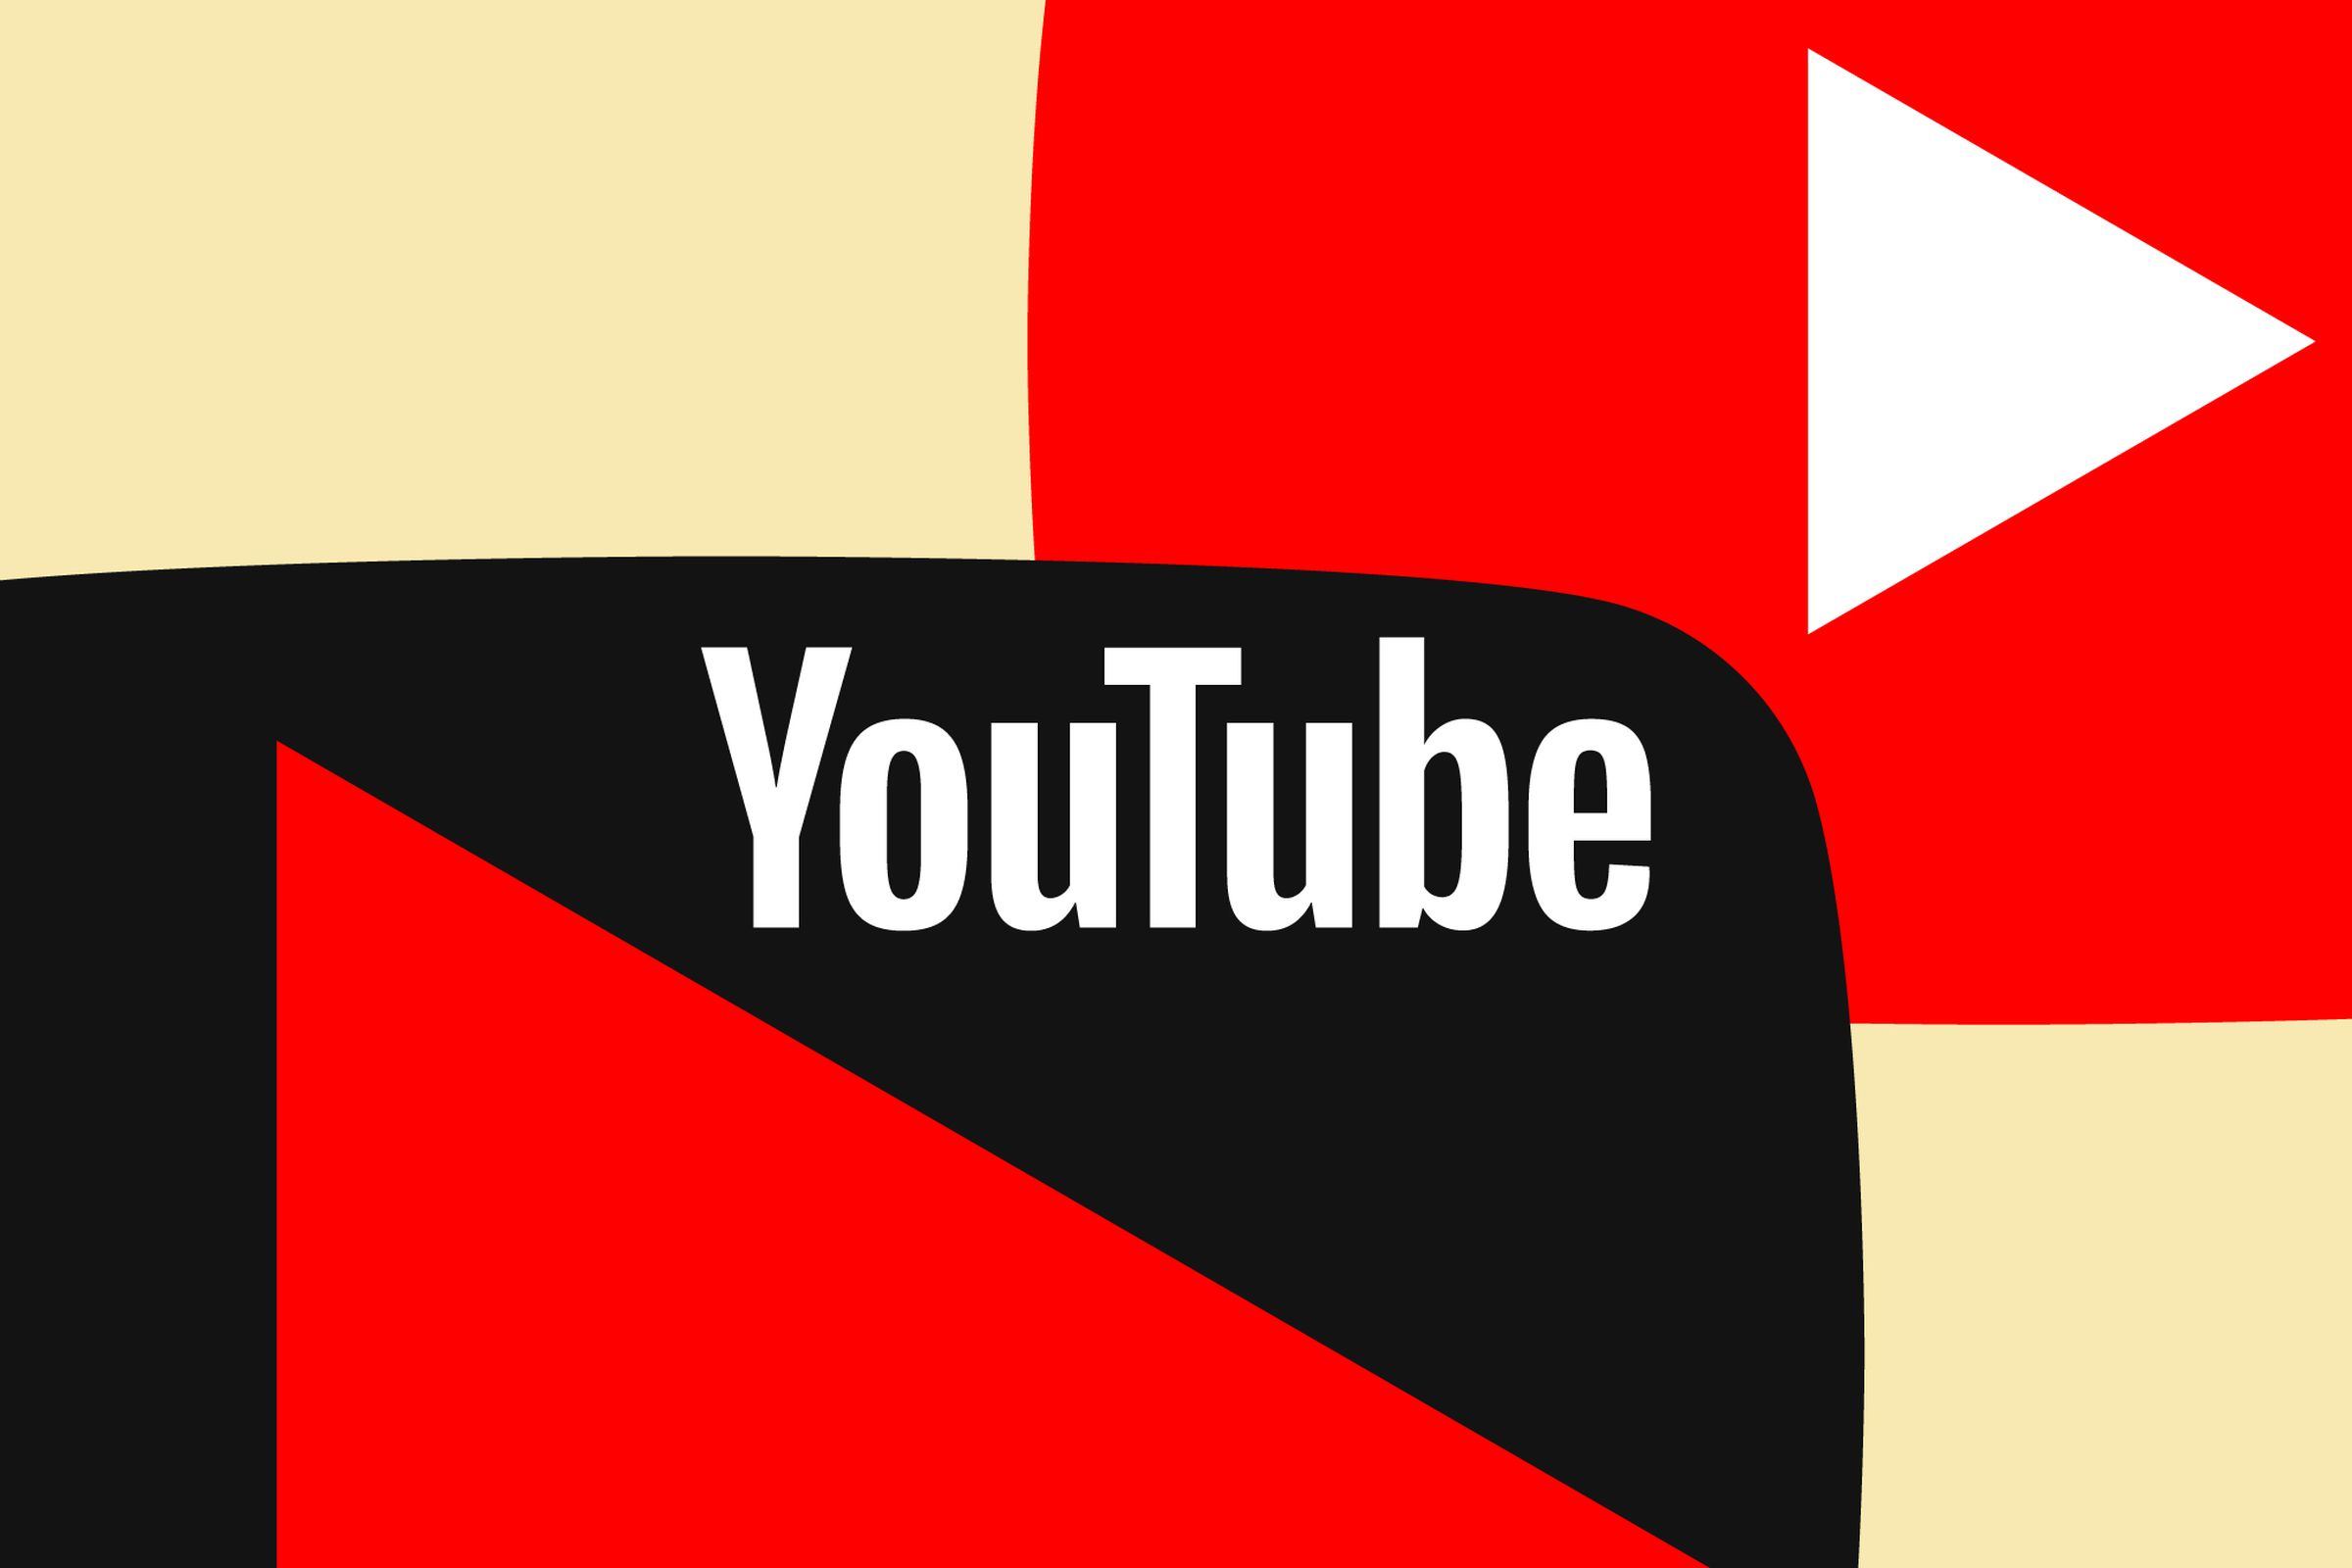 YouTube logo on an abstract background